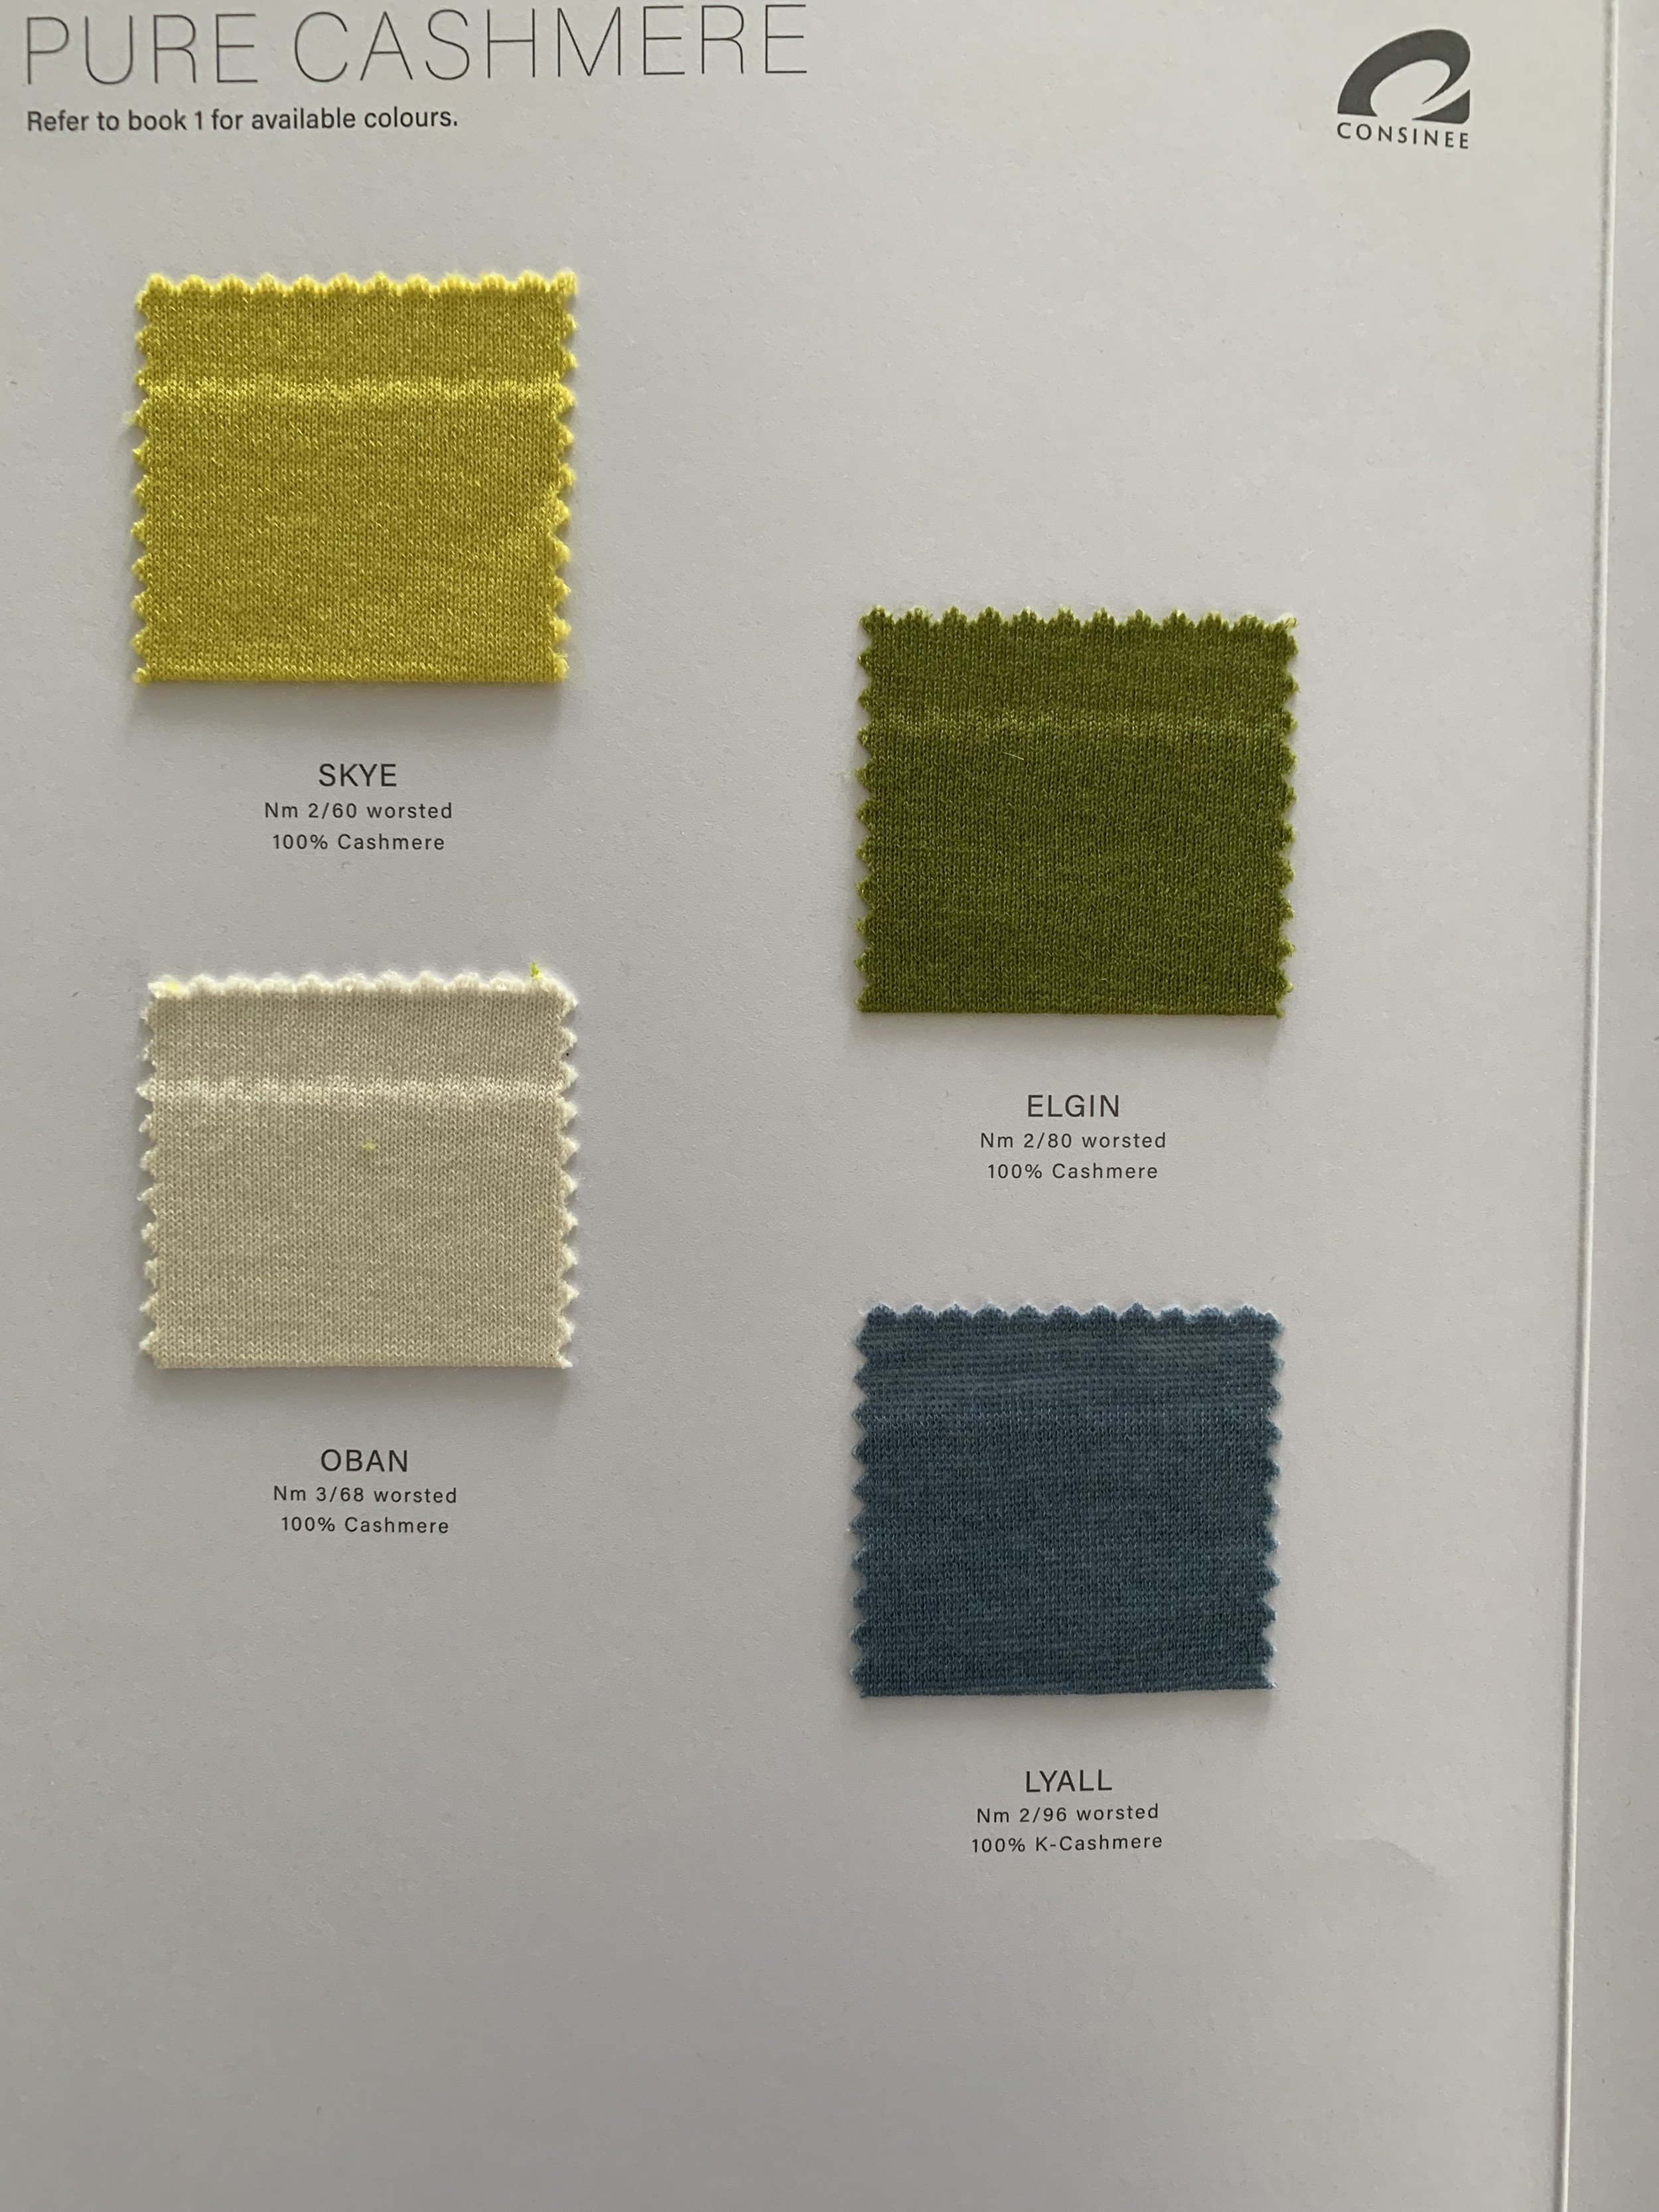 Ewsca spring cashmere blend colors cards with all materials